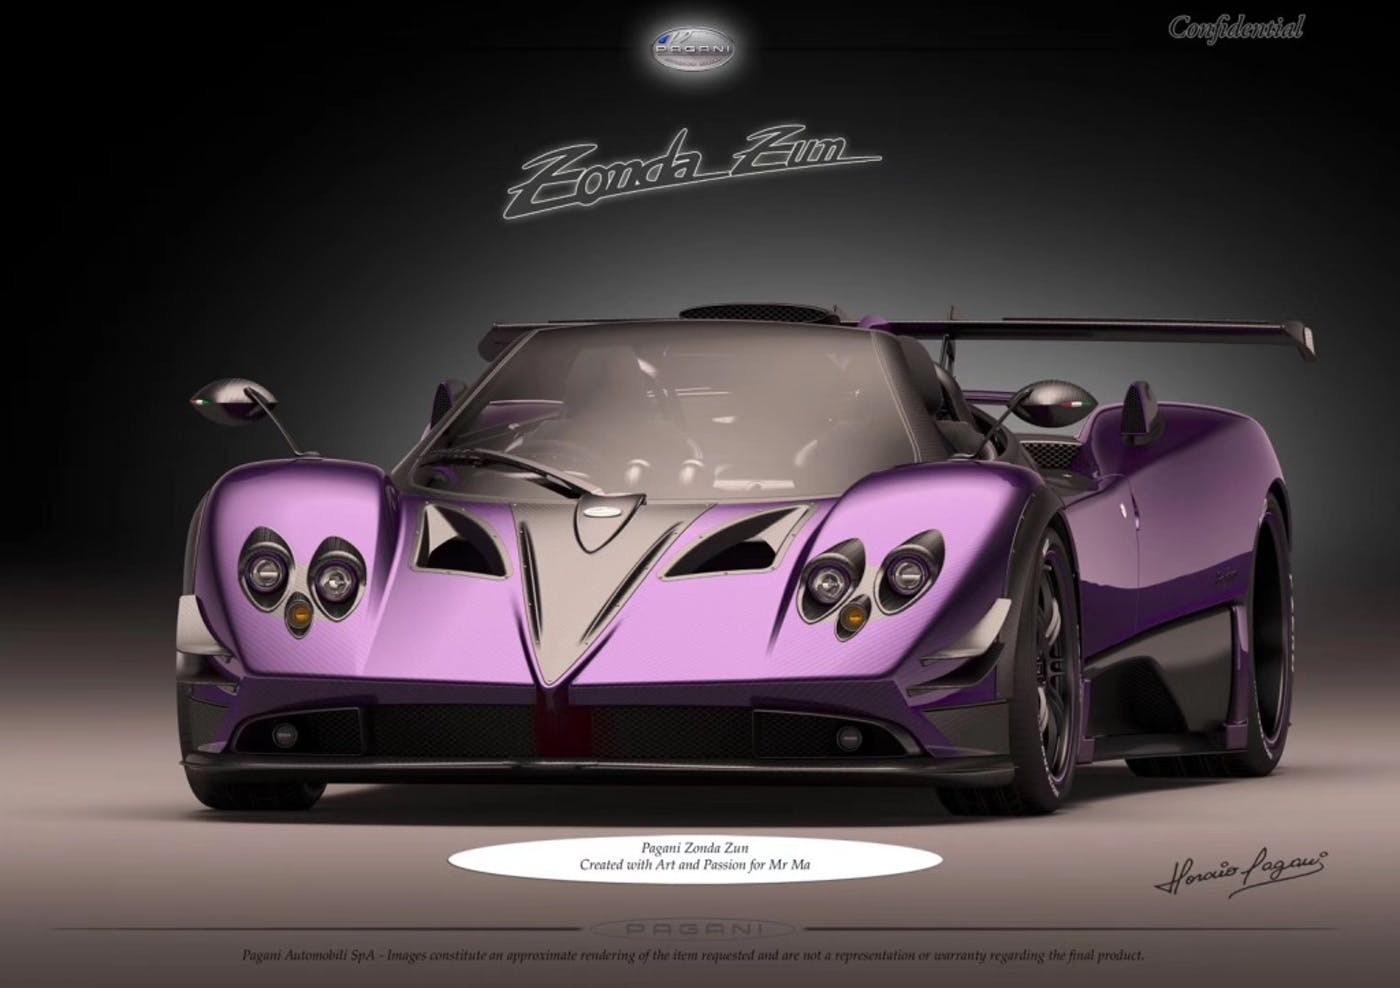 This Pagani Zonda 'Zun' Is One of the Last One-Offs